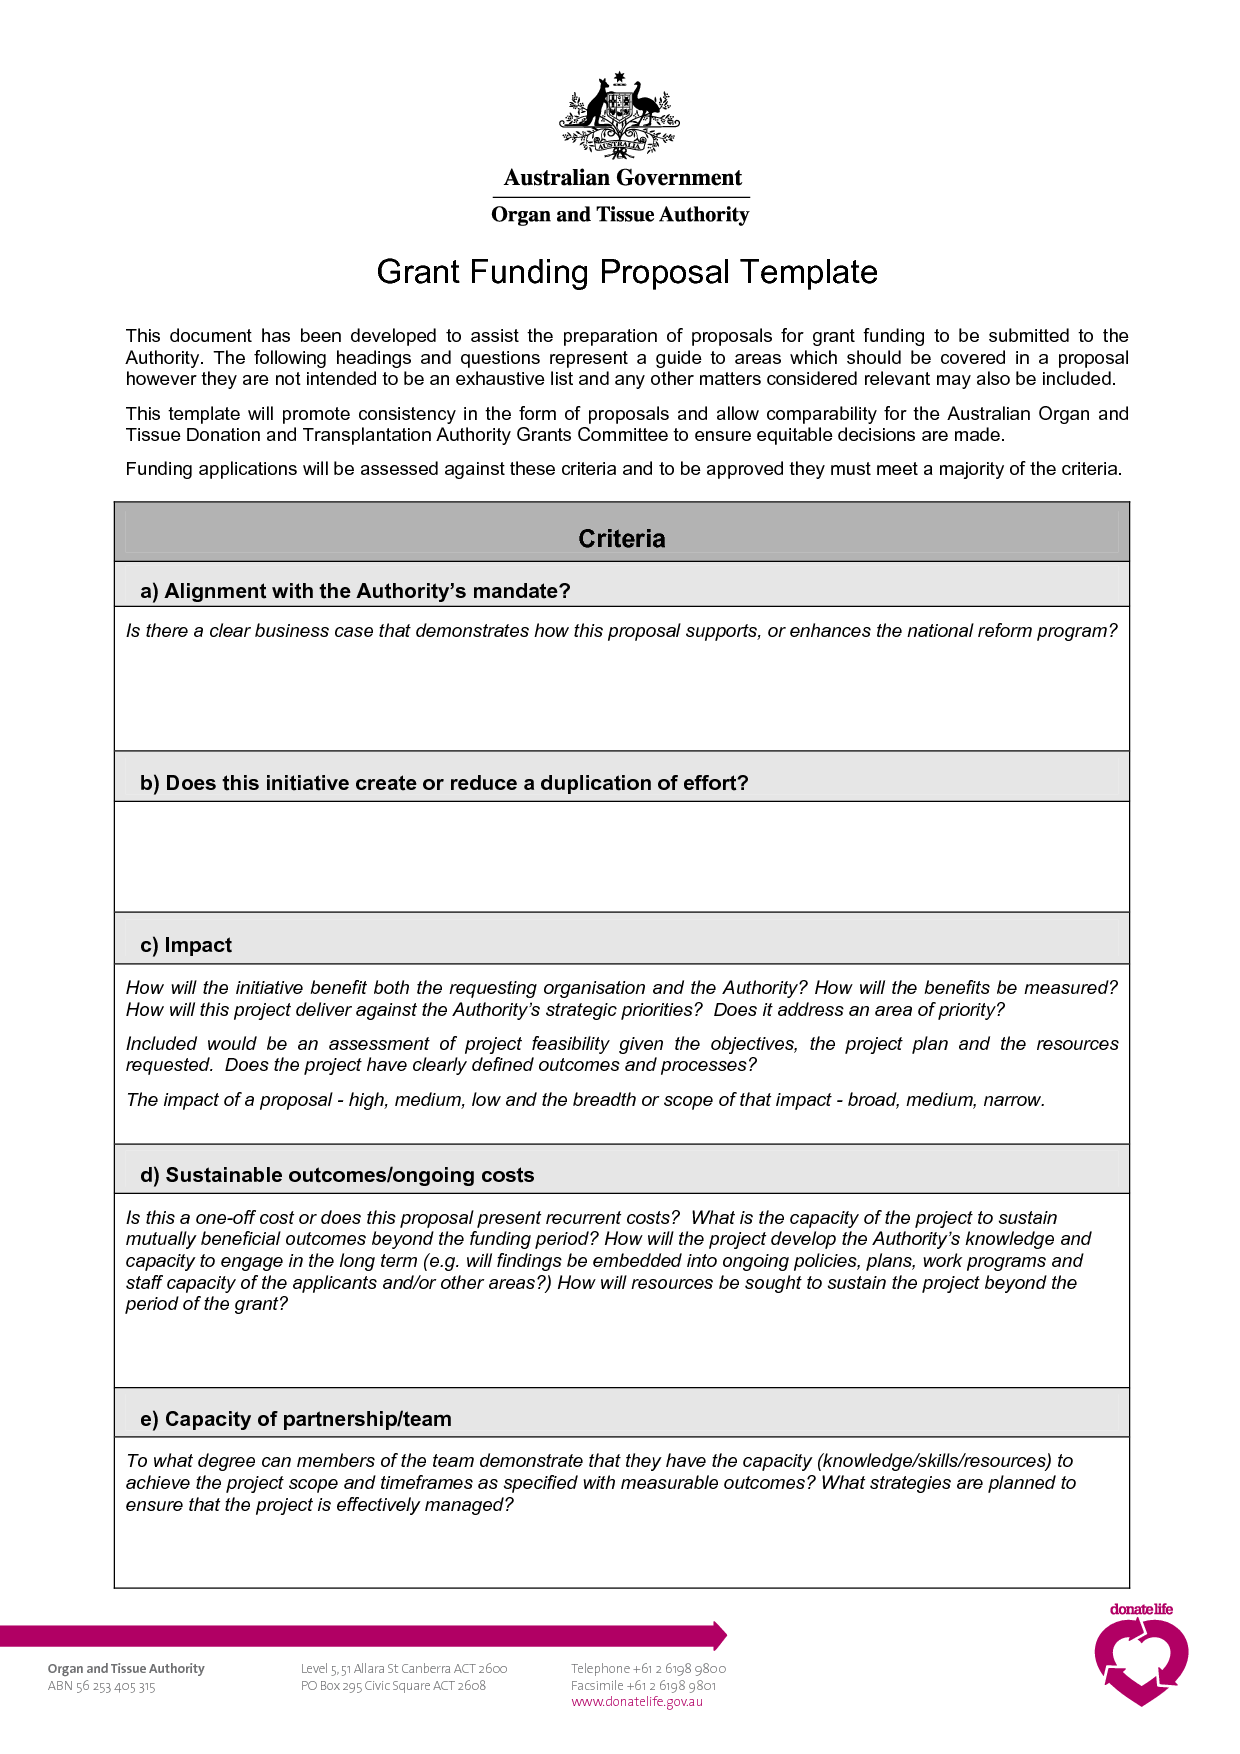 Grant Proposal Template: Download, Create, Edit, Fill and Print 